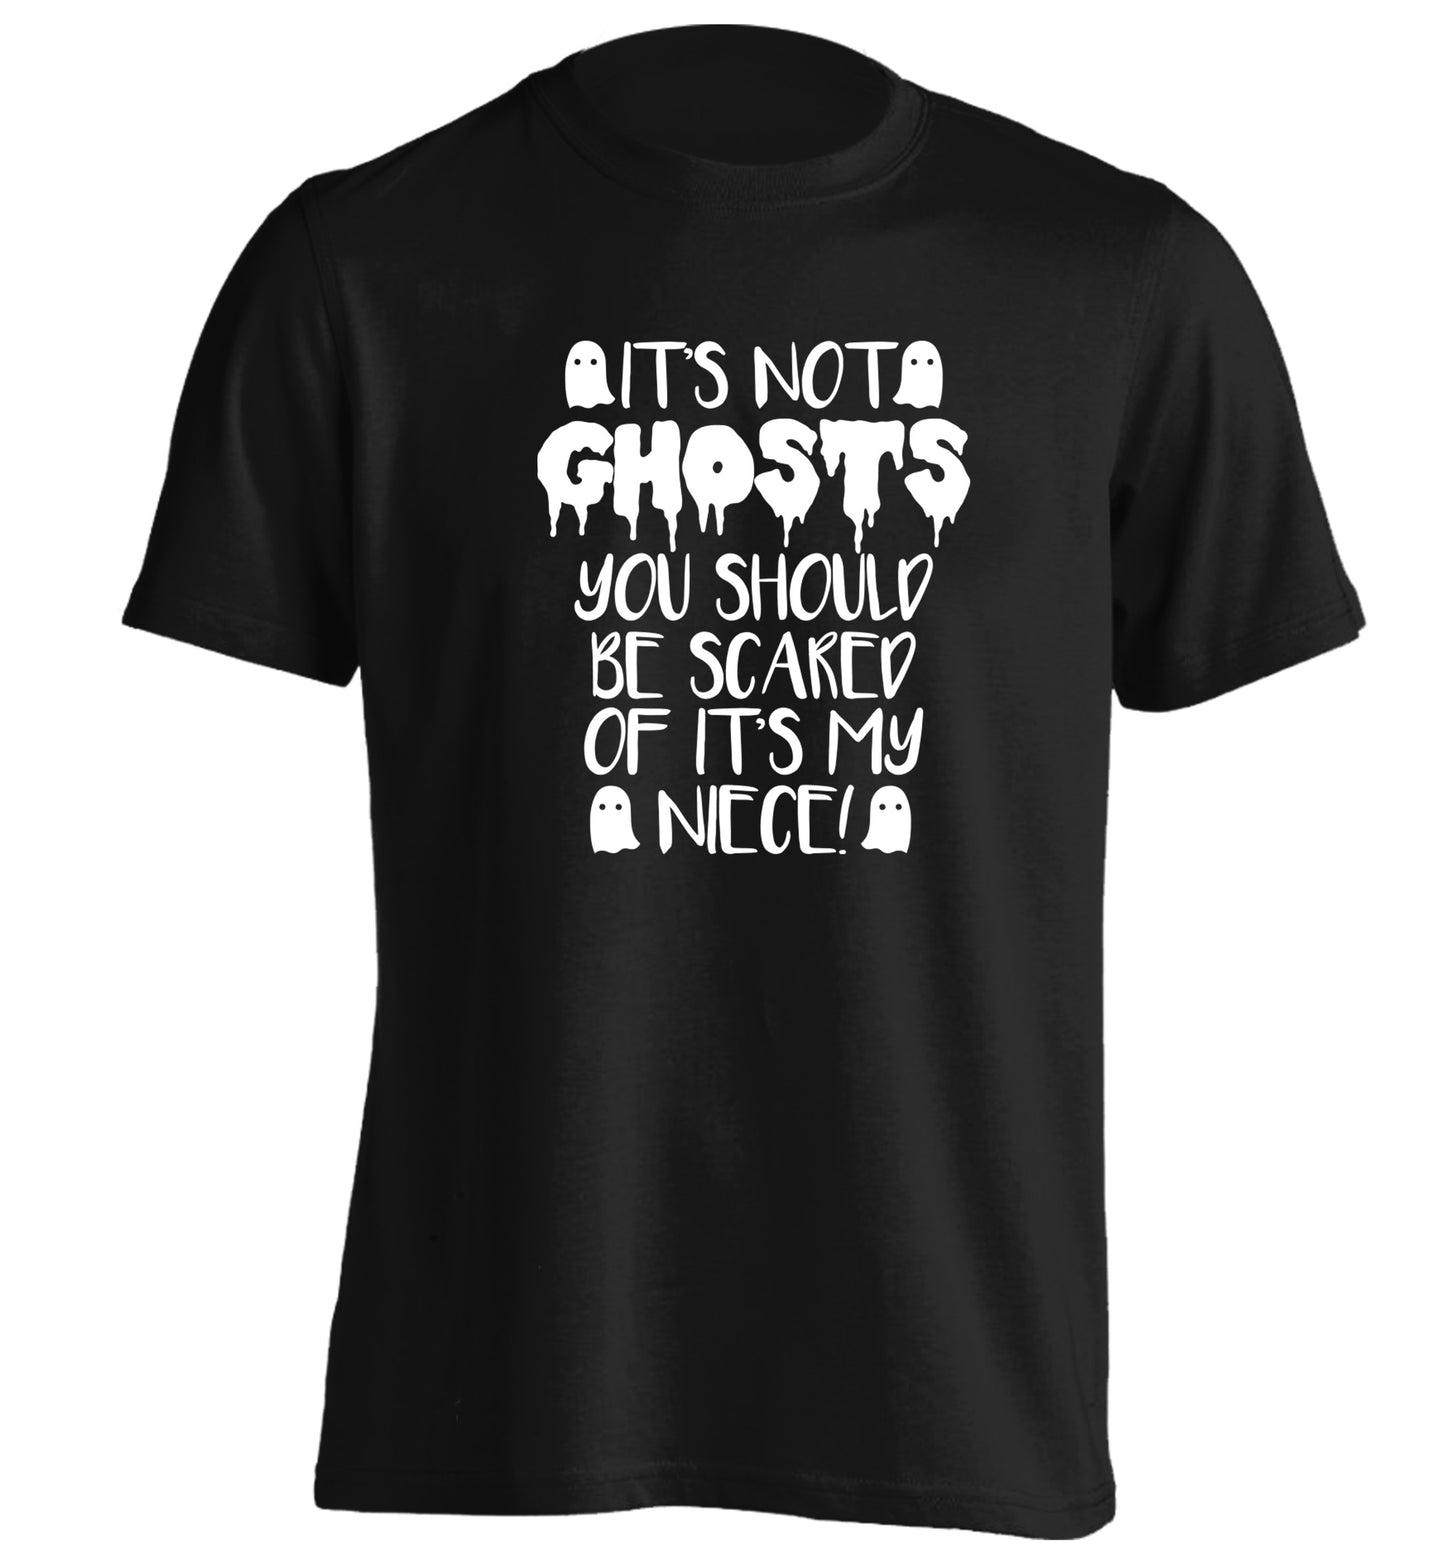 It's not ghosts you should be scared of it's my niece! adults unisex black Tshirt 2XL